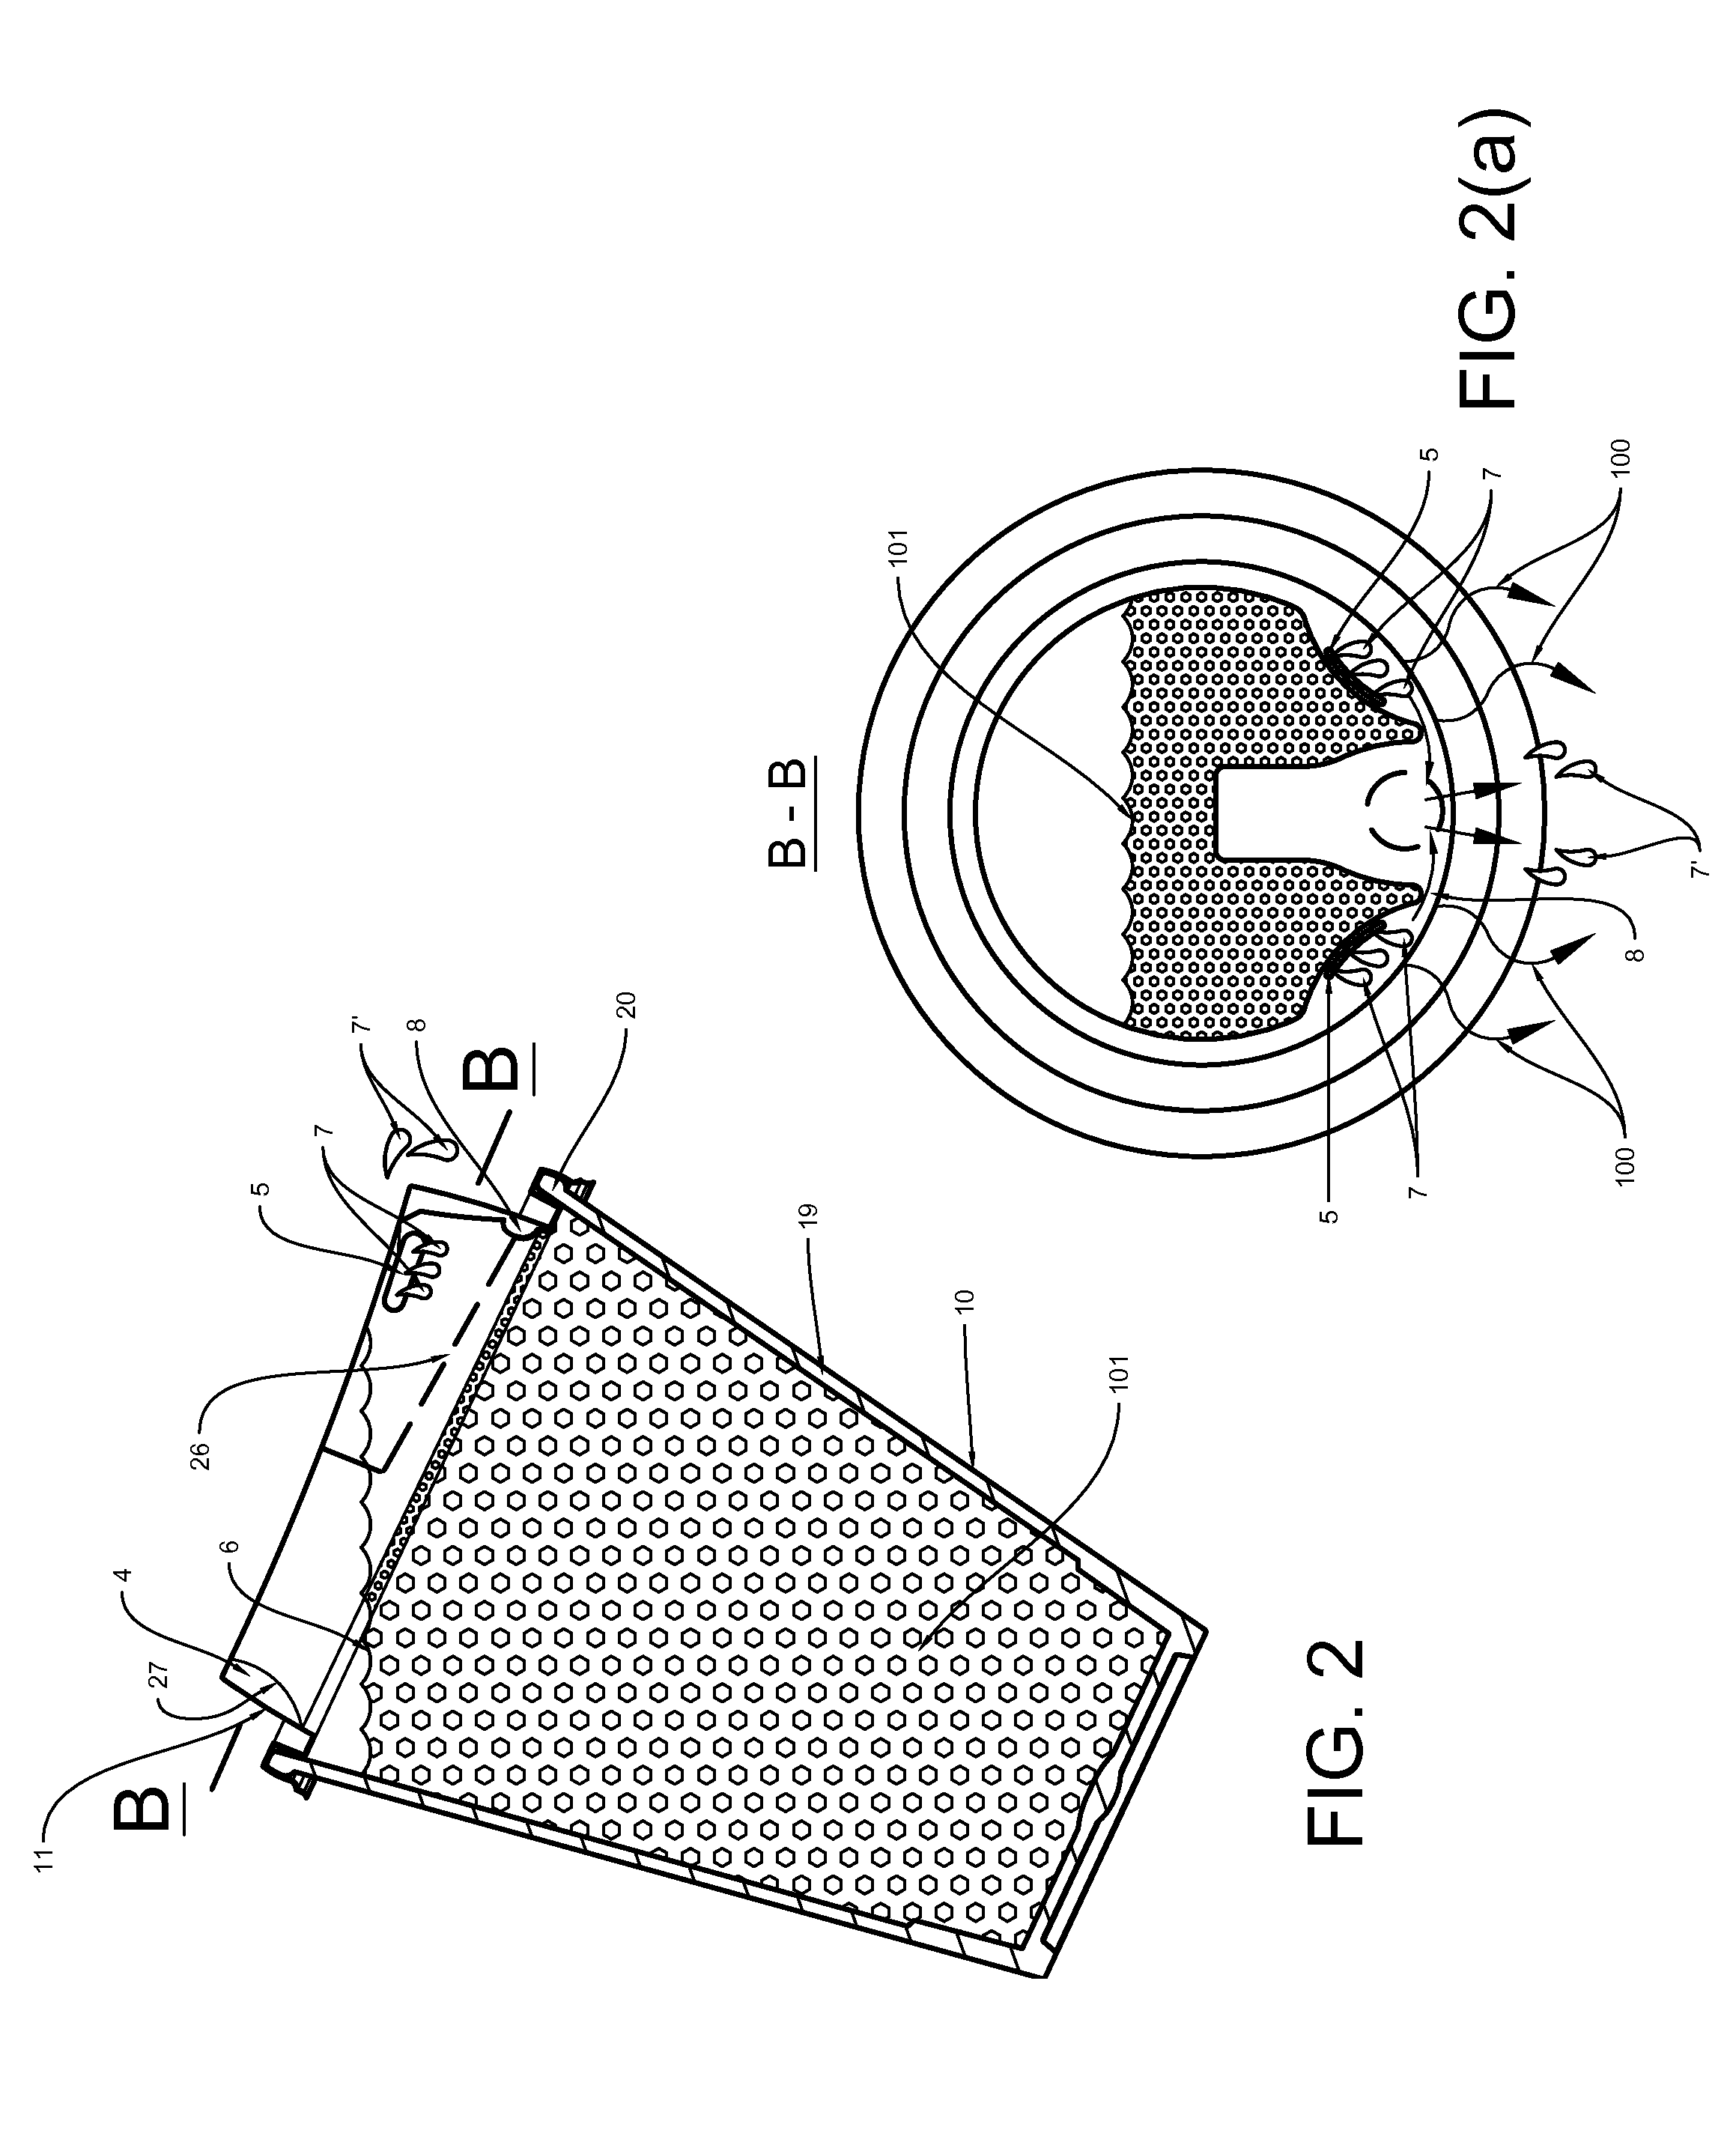 Hot Beverage Container Lid Construction and Packaging Method